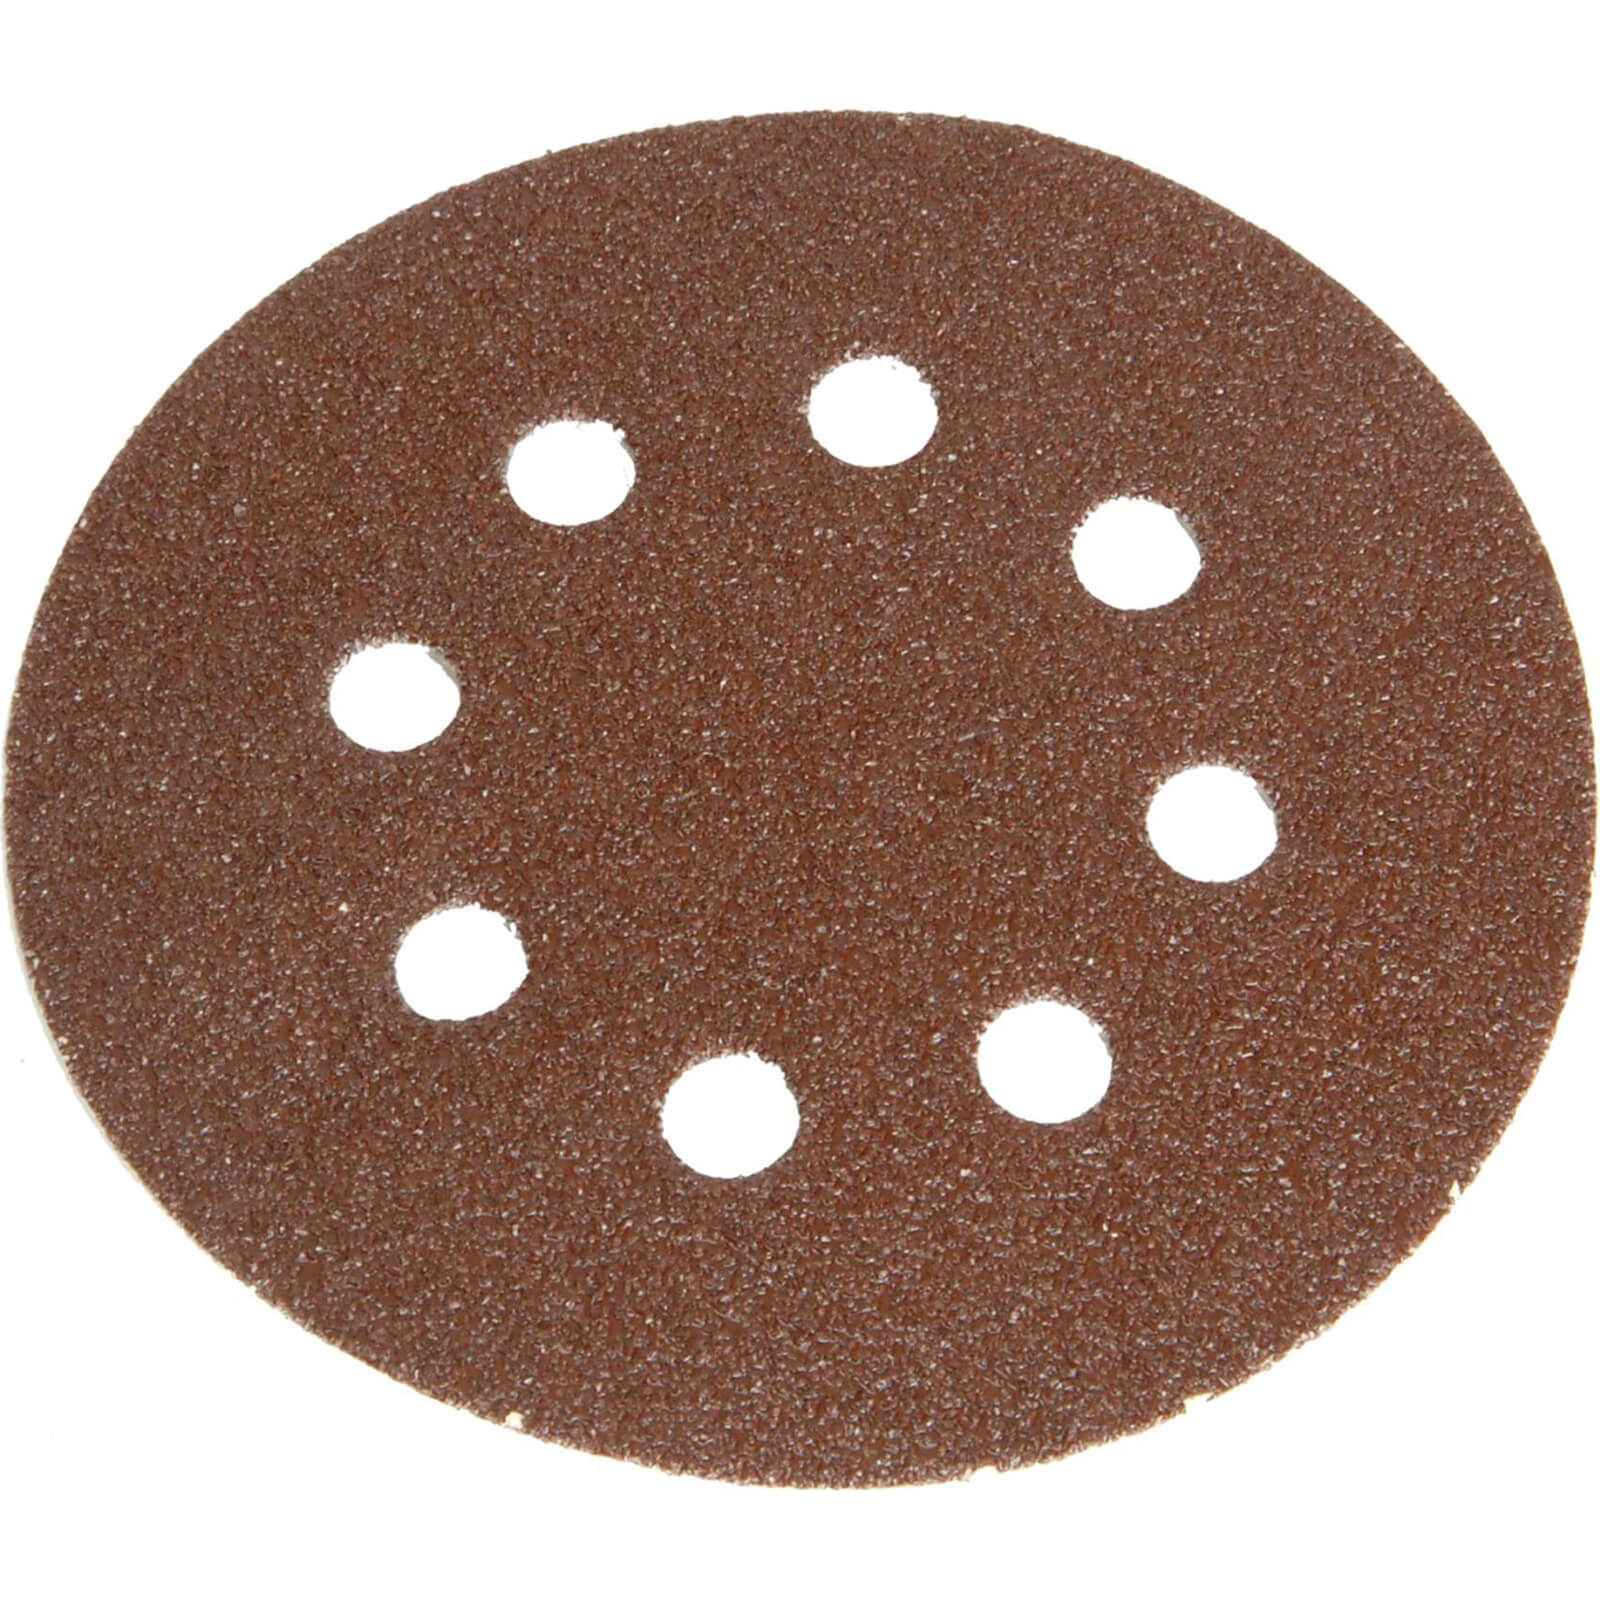 Image of Faithfull 125mm Hook and Loop Perforated Sanding Discs 125mm Very Fine Pack of 5